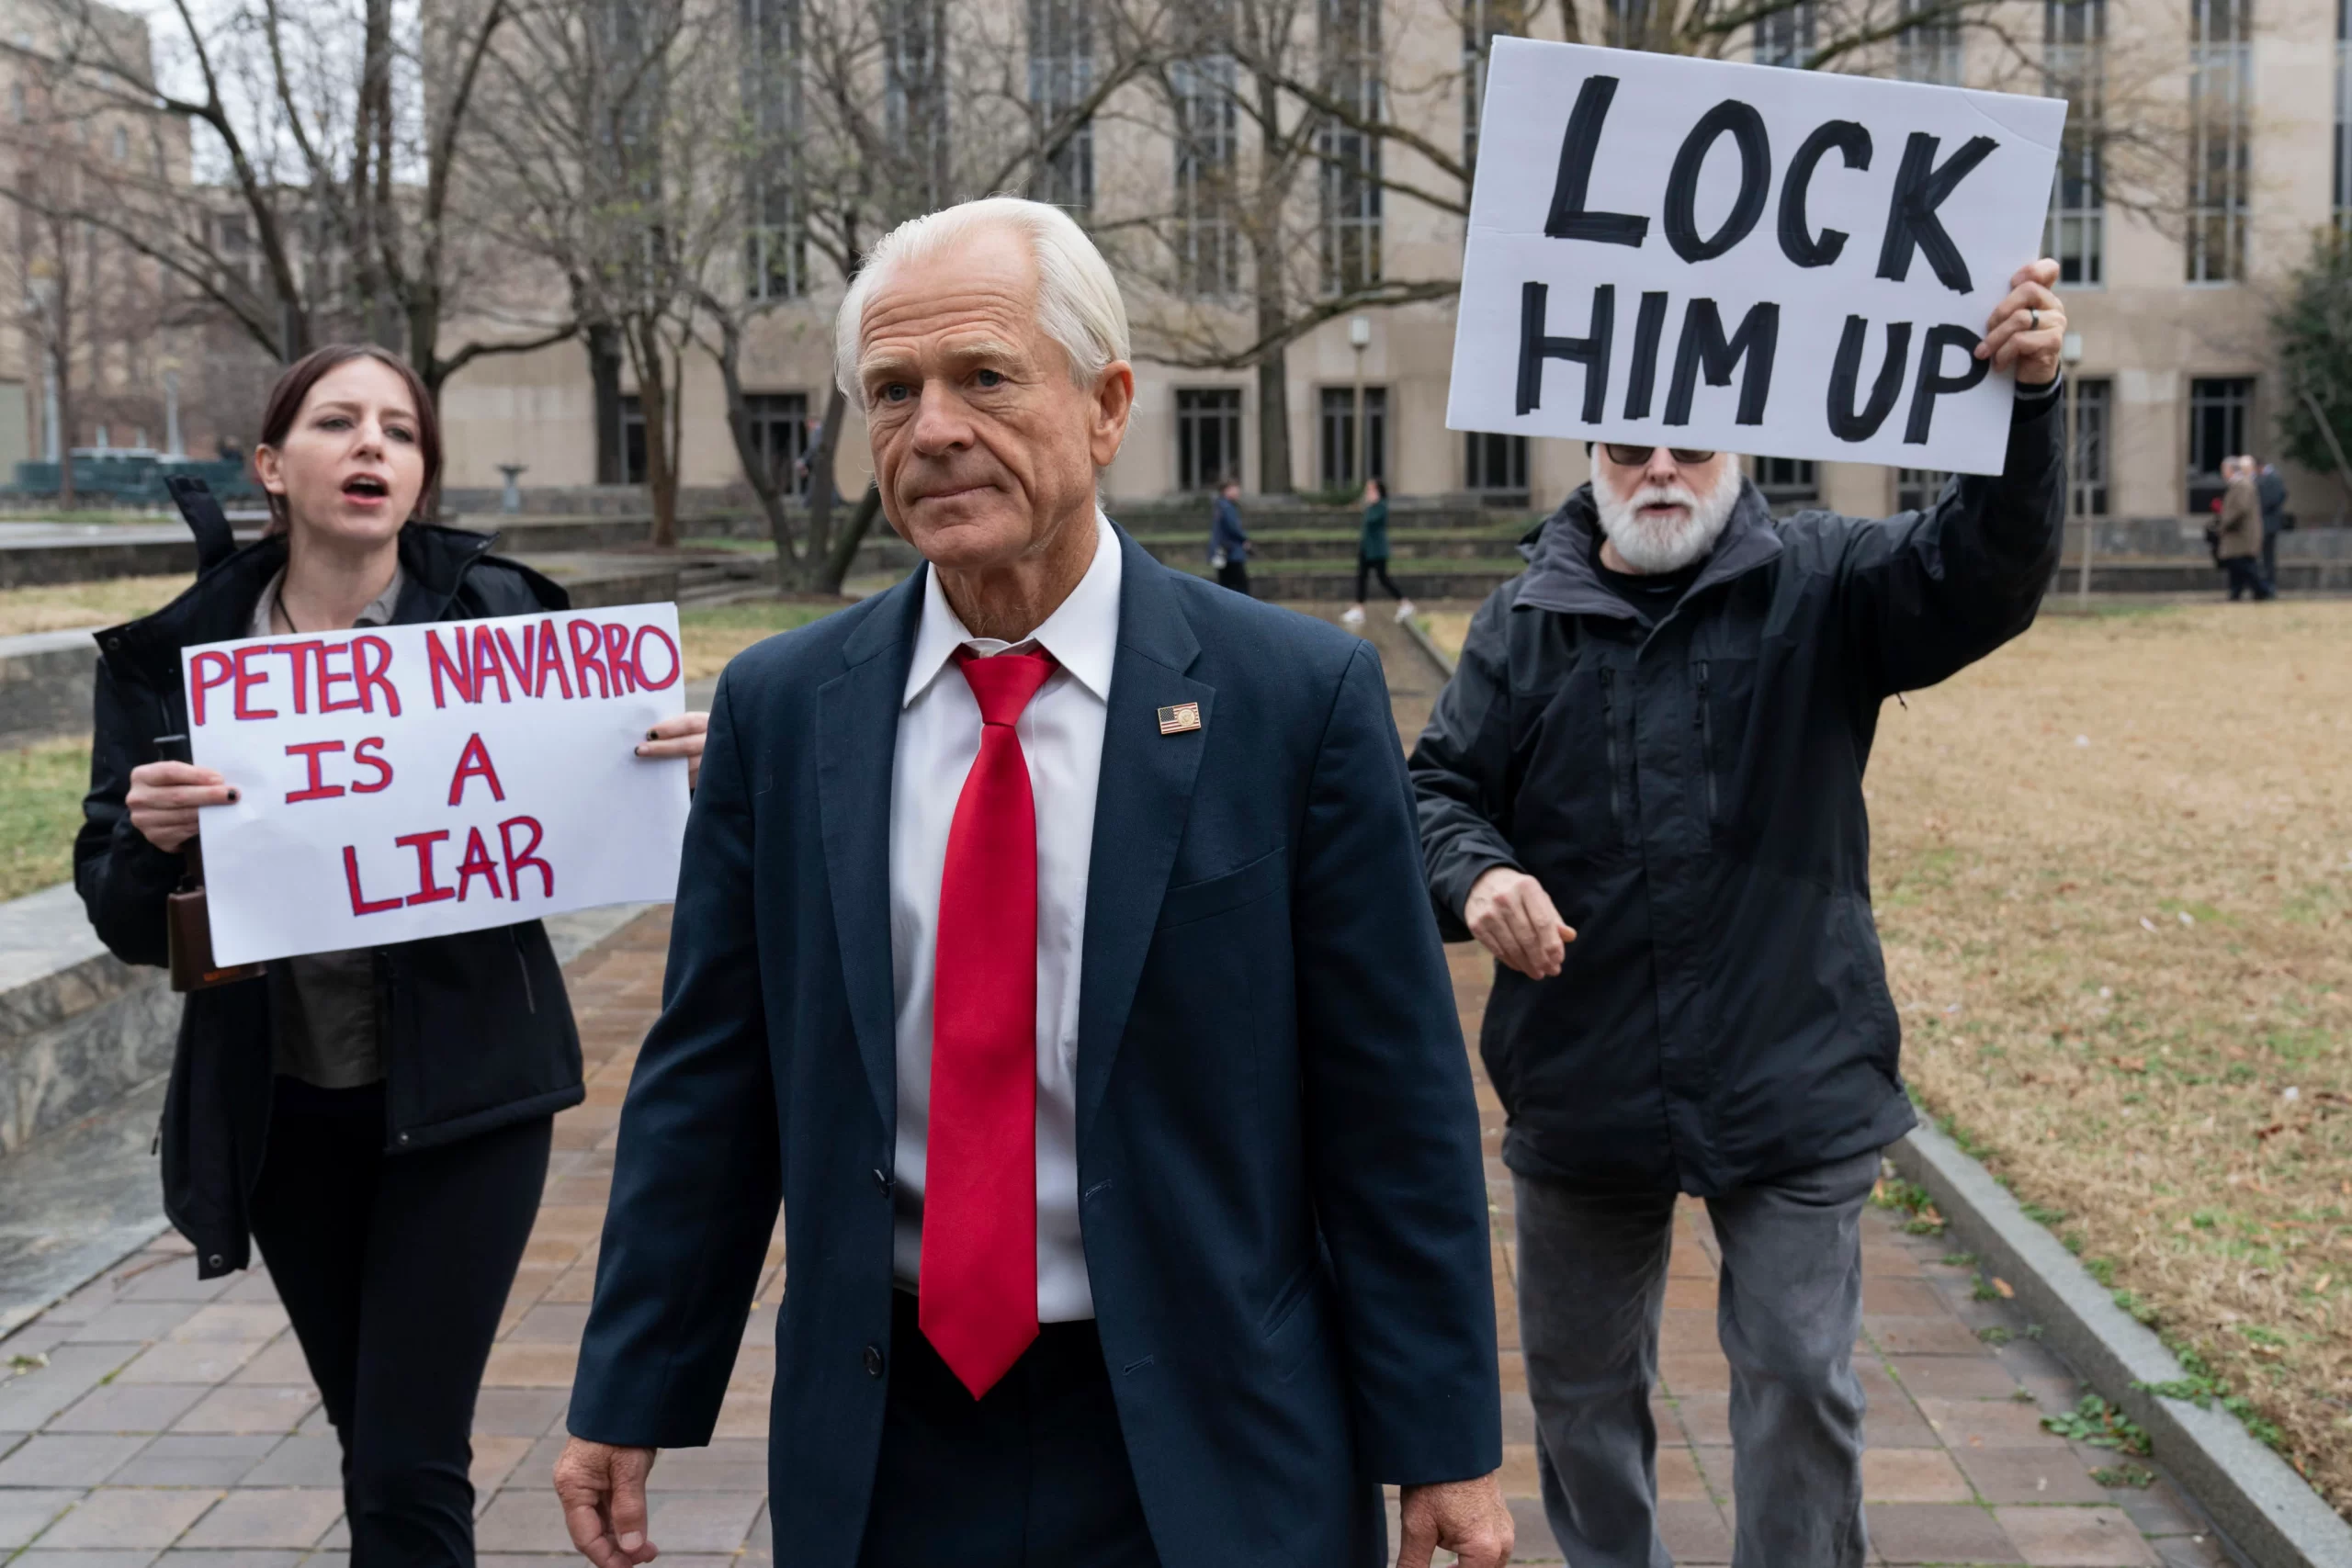 Judge Rejects Peter Navarro's Request to Stay Out of Prison During Appeal of Contempt of Congress Case